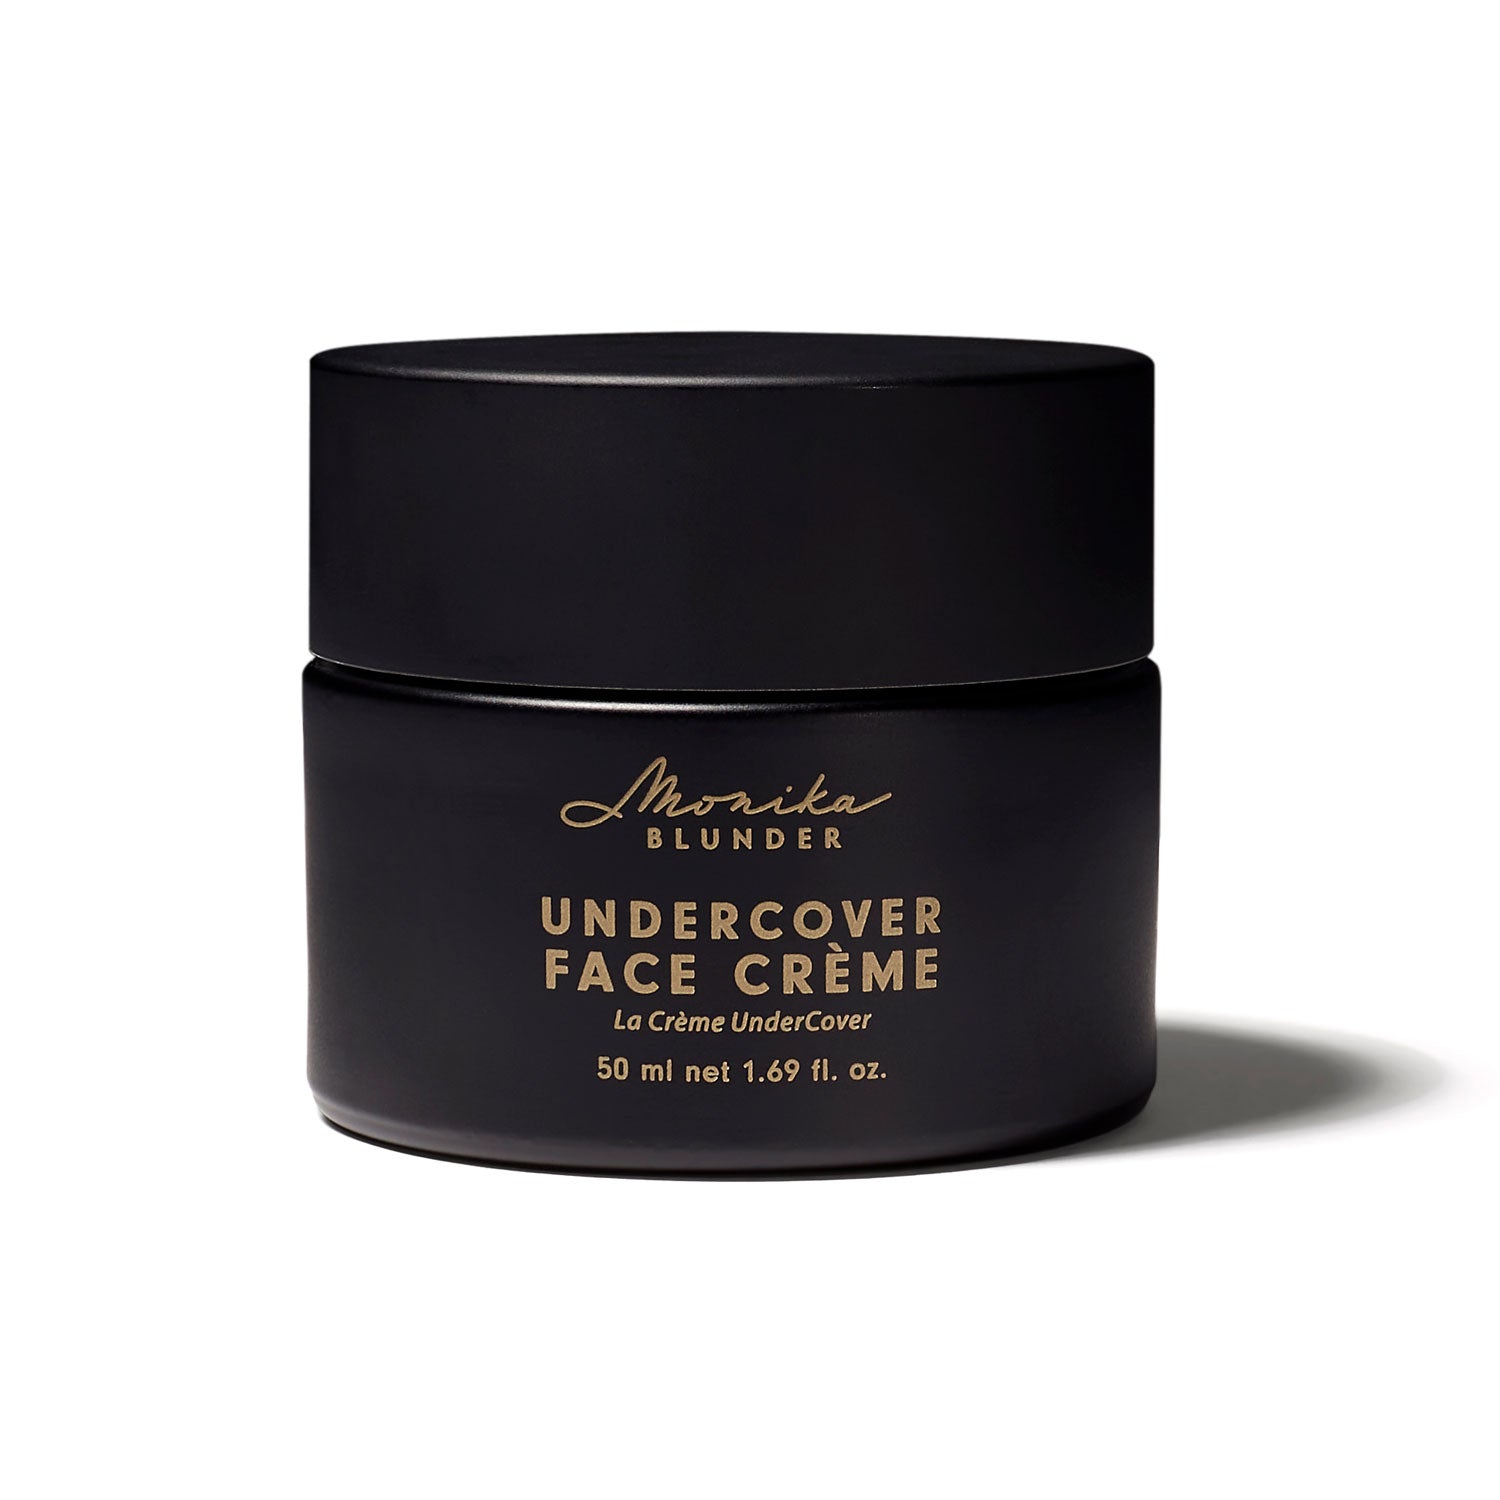 Undercover Face Crème One Size Monika Blunder Beauty